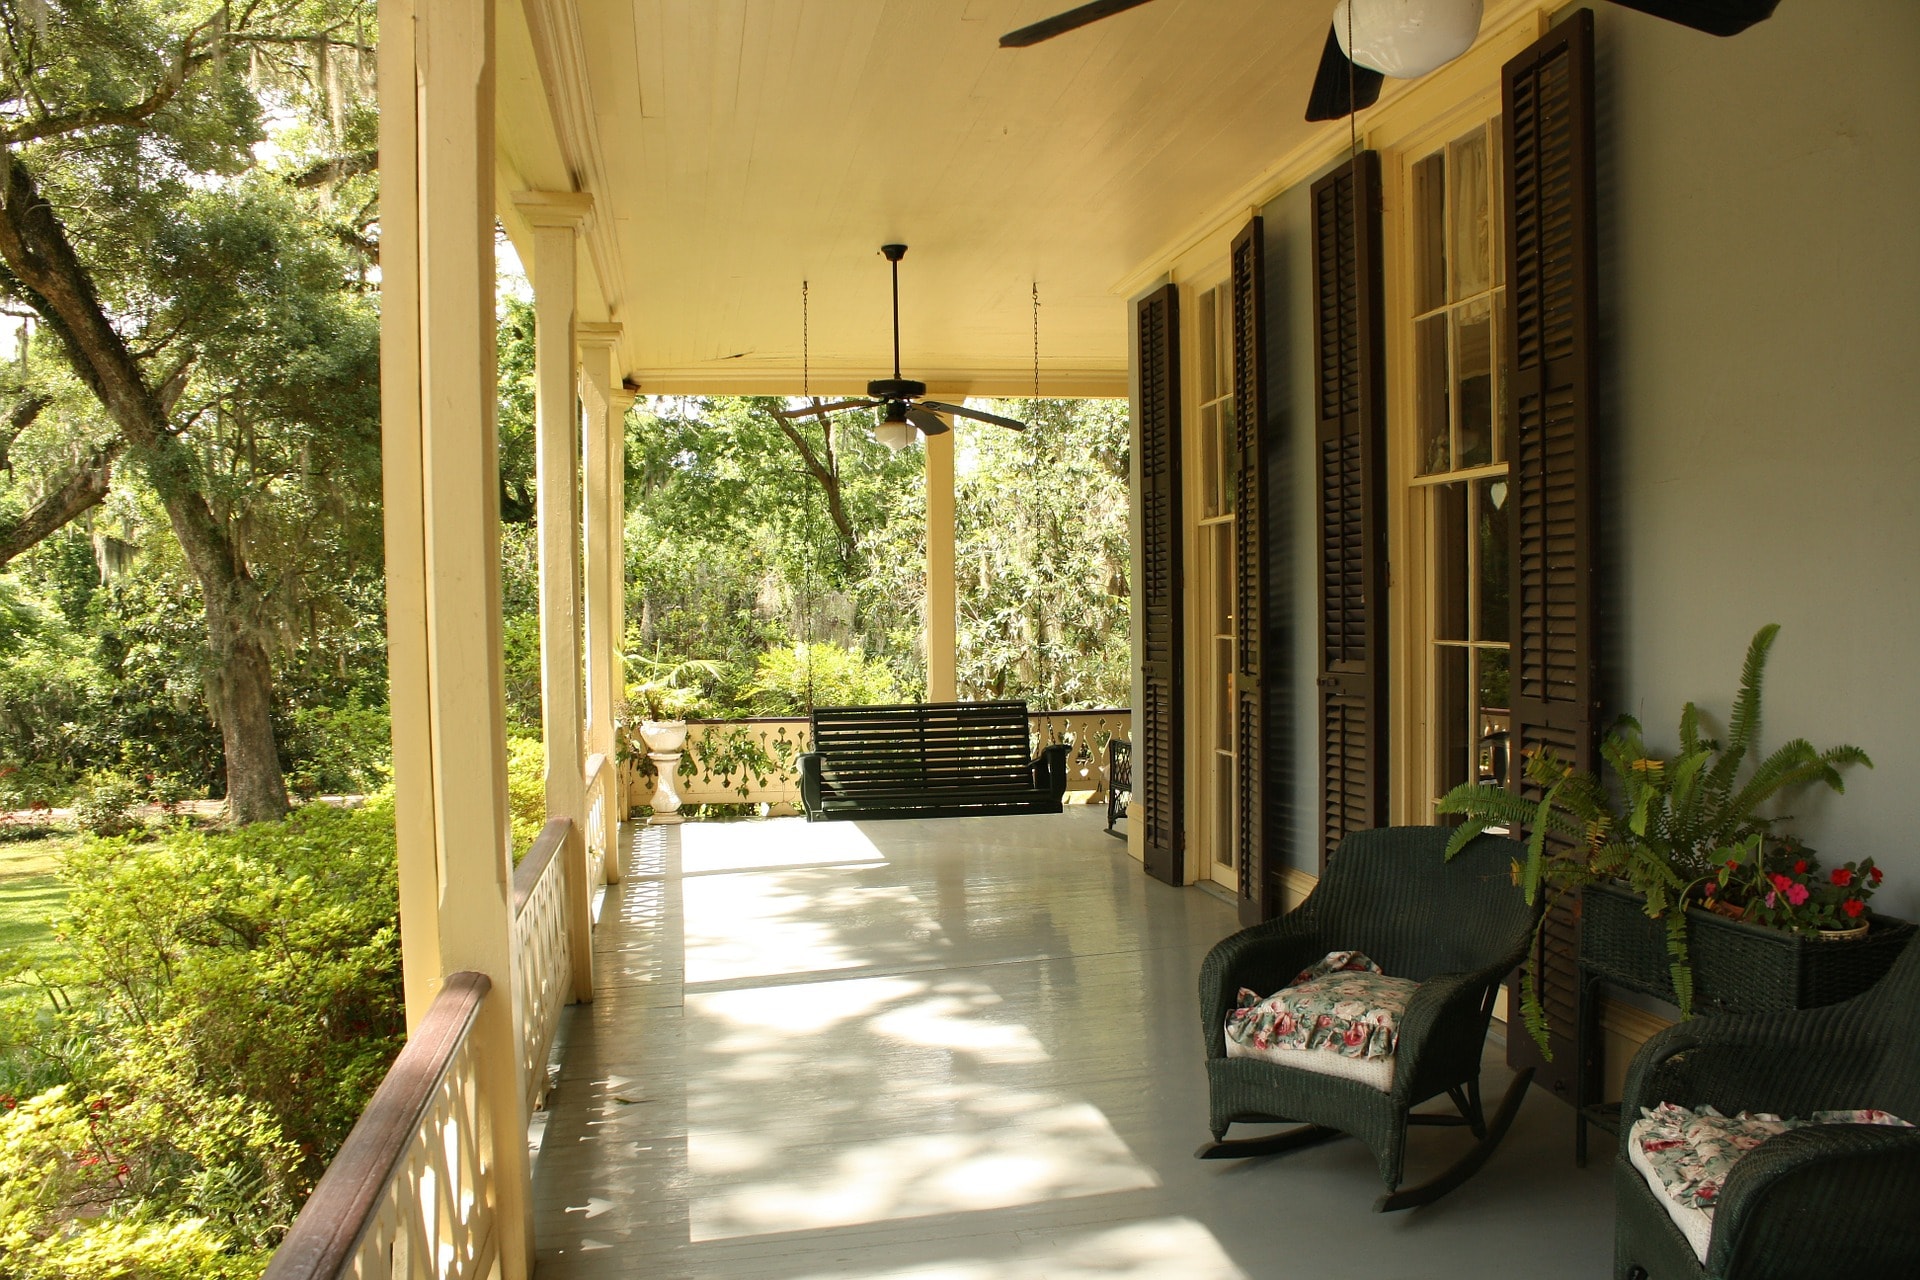 An image of a beautiful porch in a house with chairs,fan and a sceinic view of the greenery around